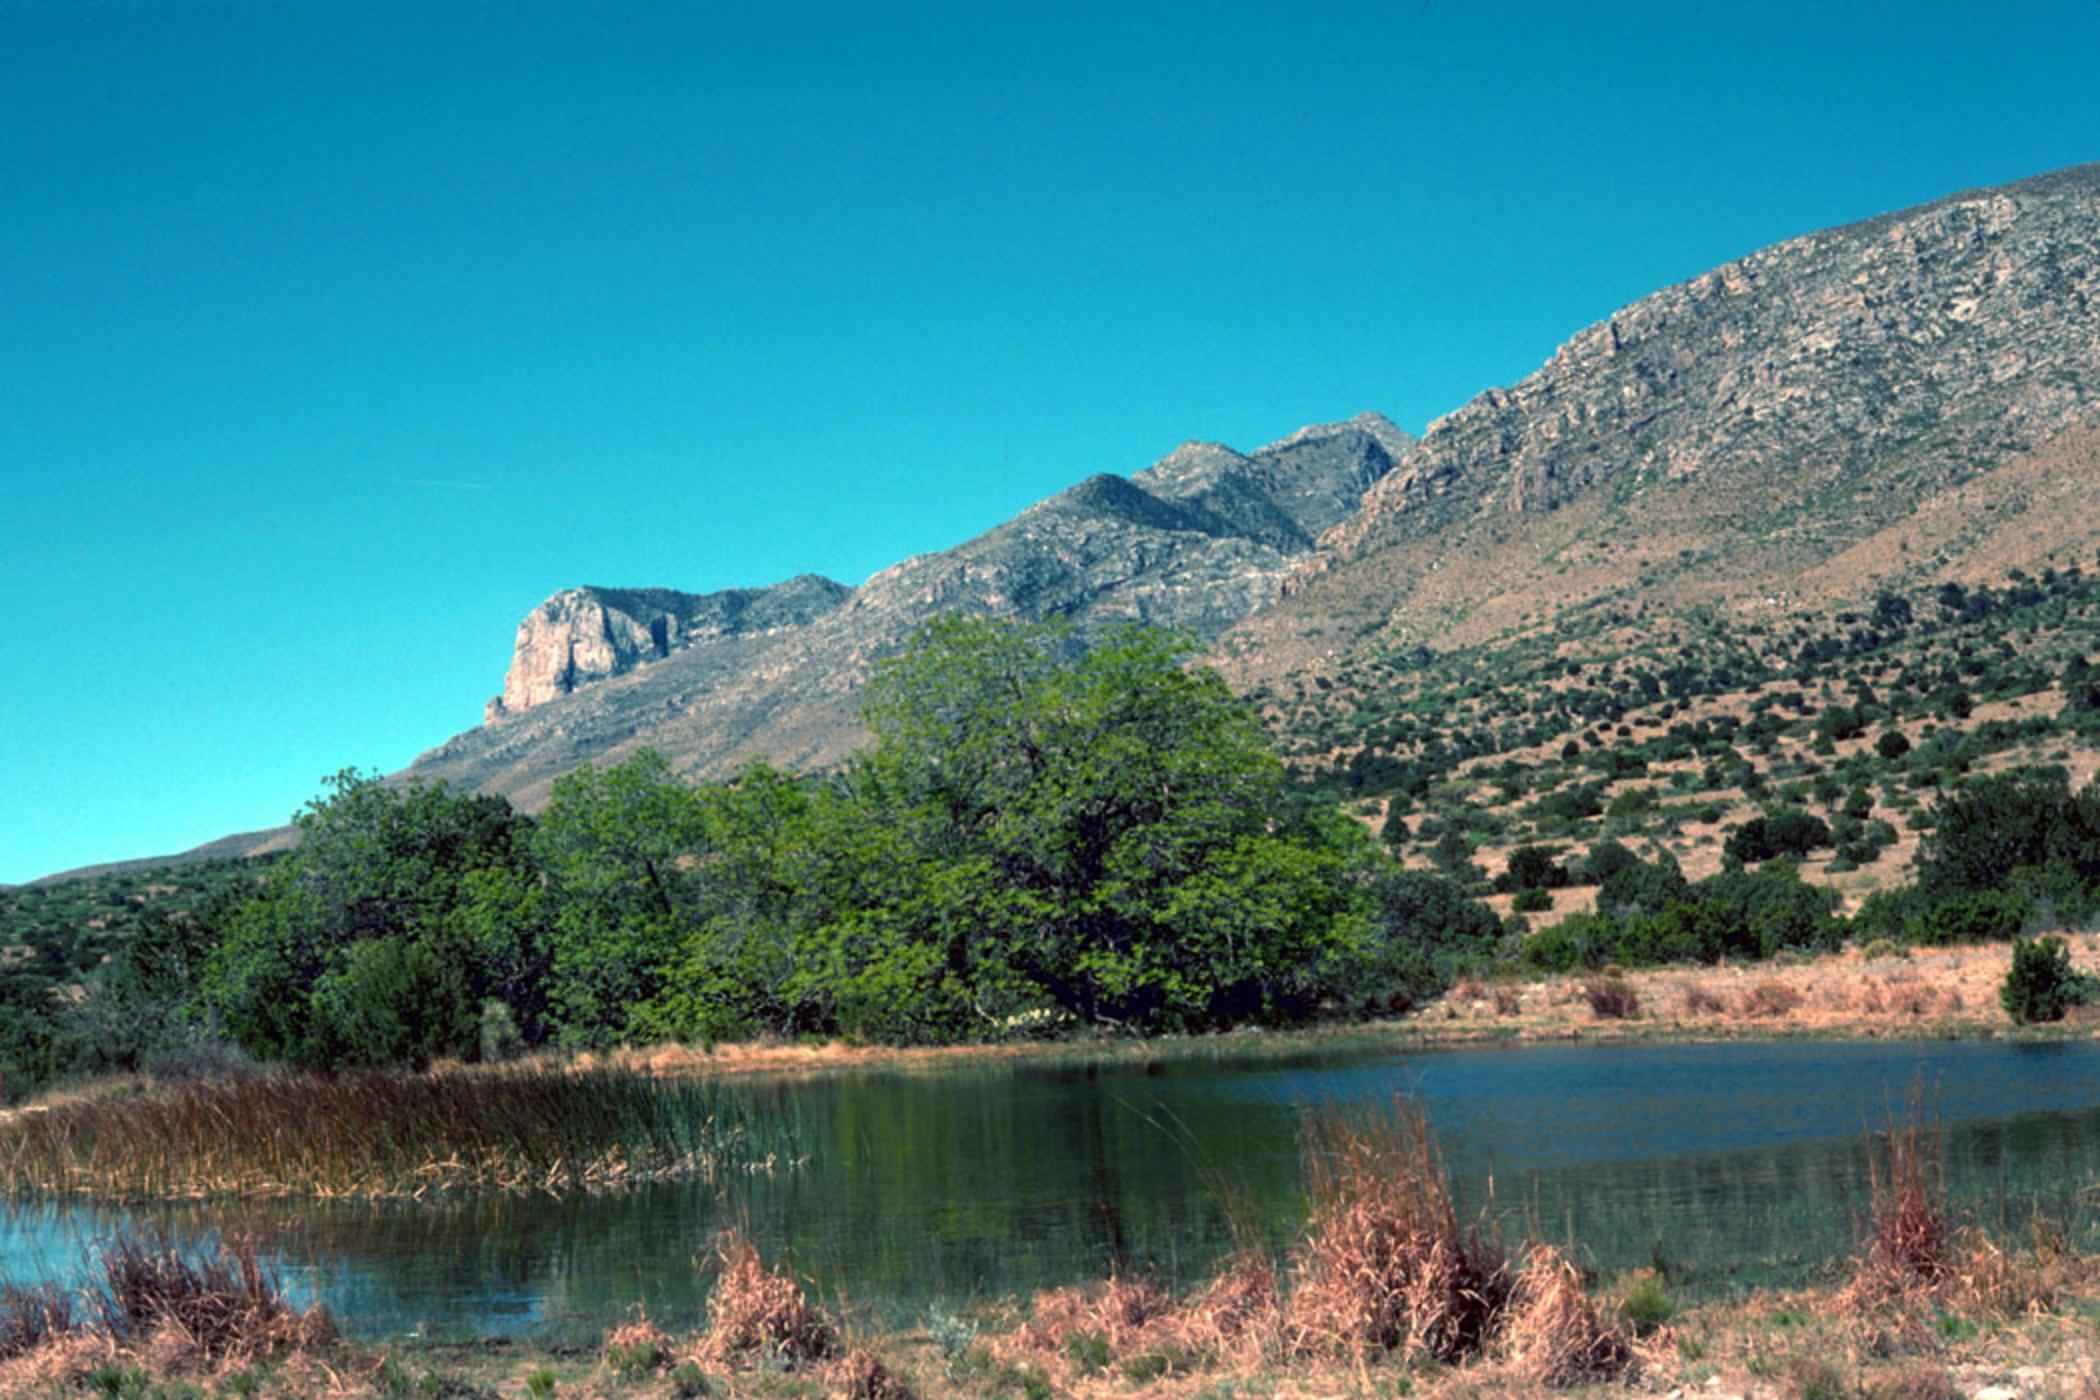 Guadalupe mountains national